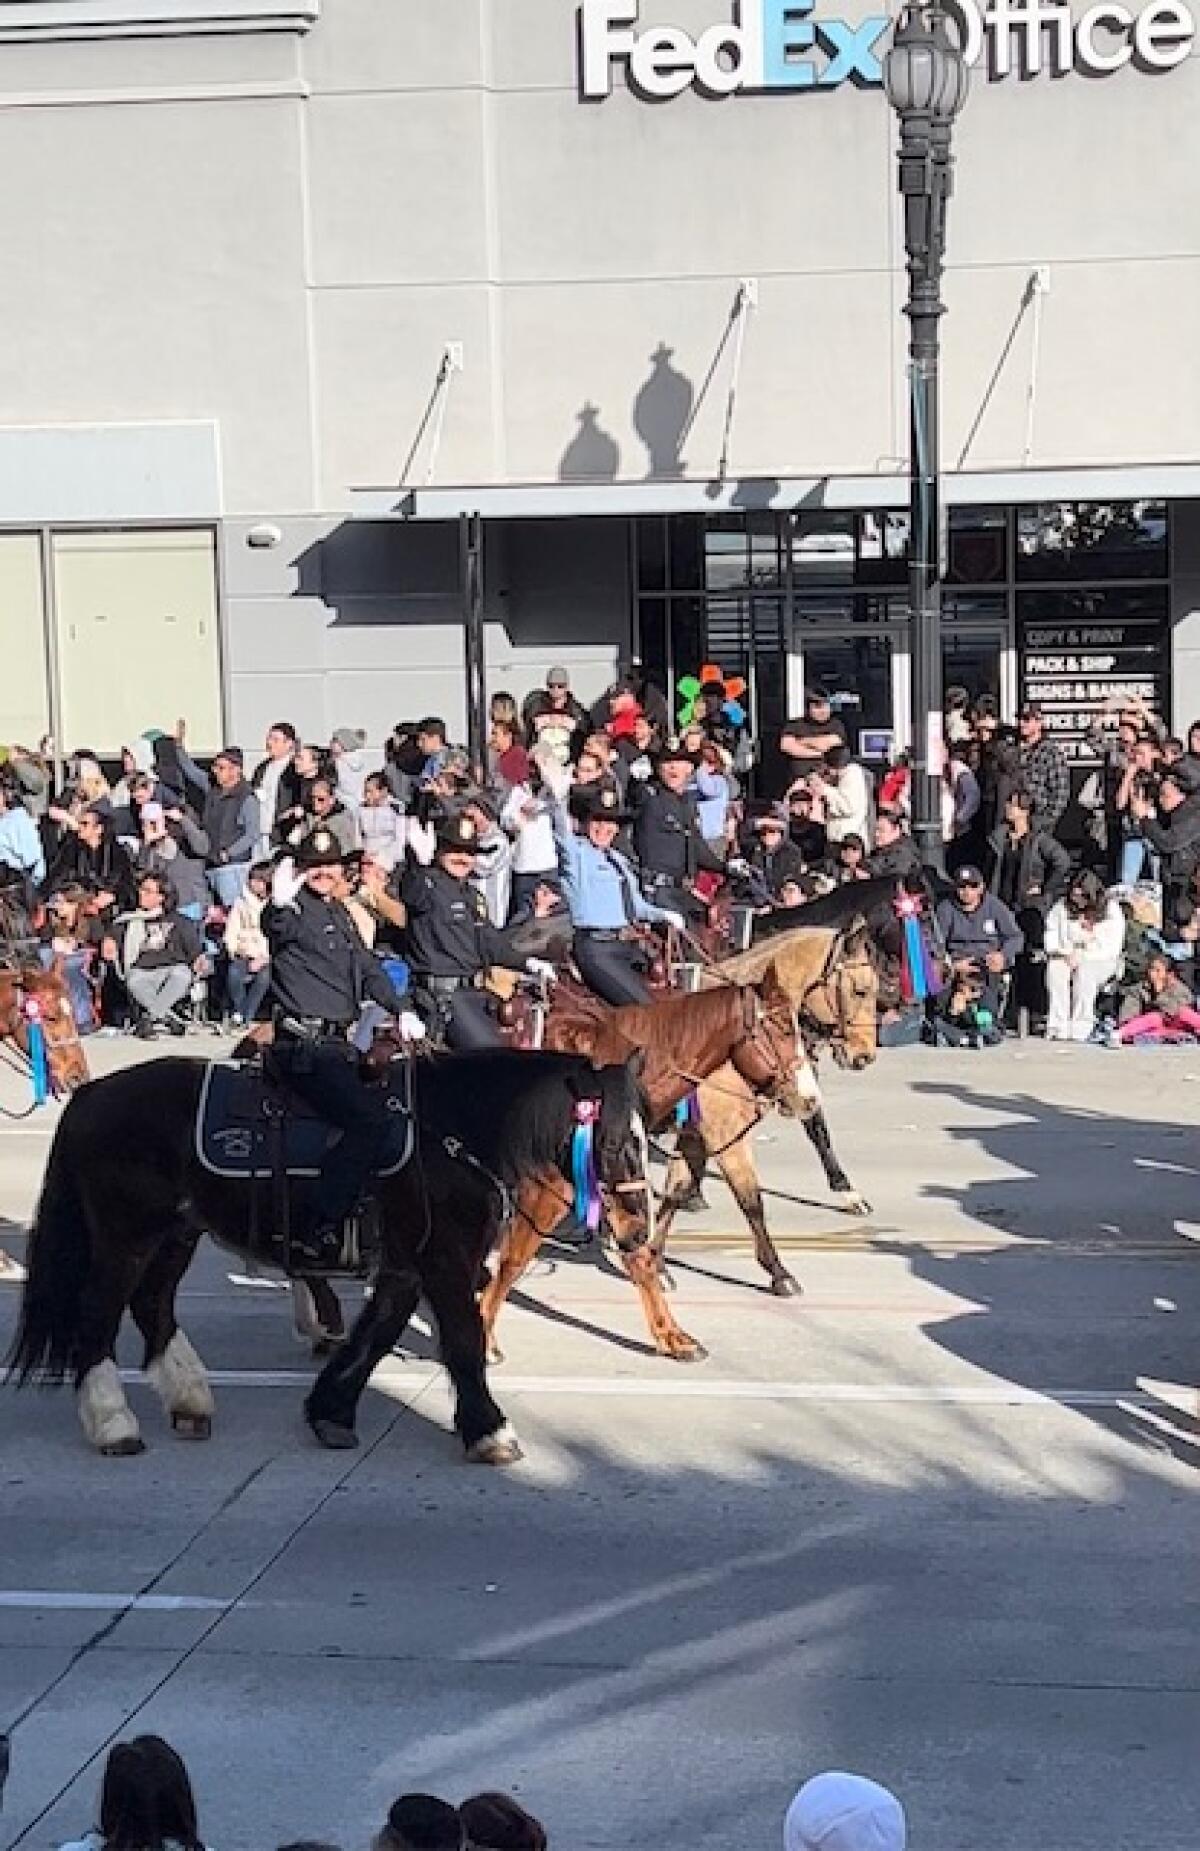 Mounted officers from the Newport Beach Police Department wave to Rose Parade crowd.